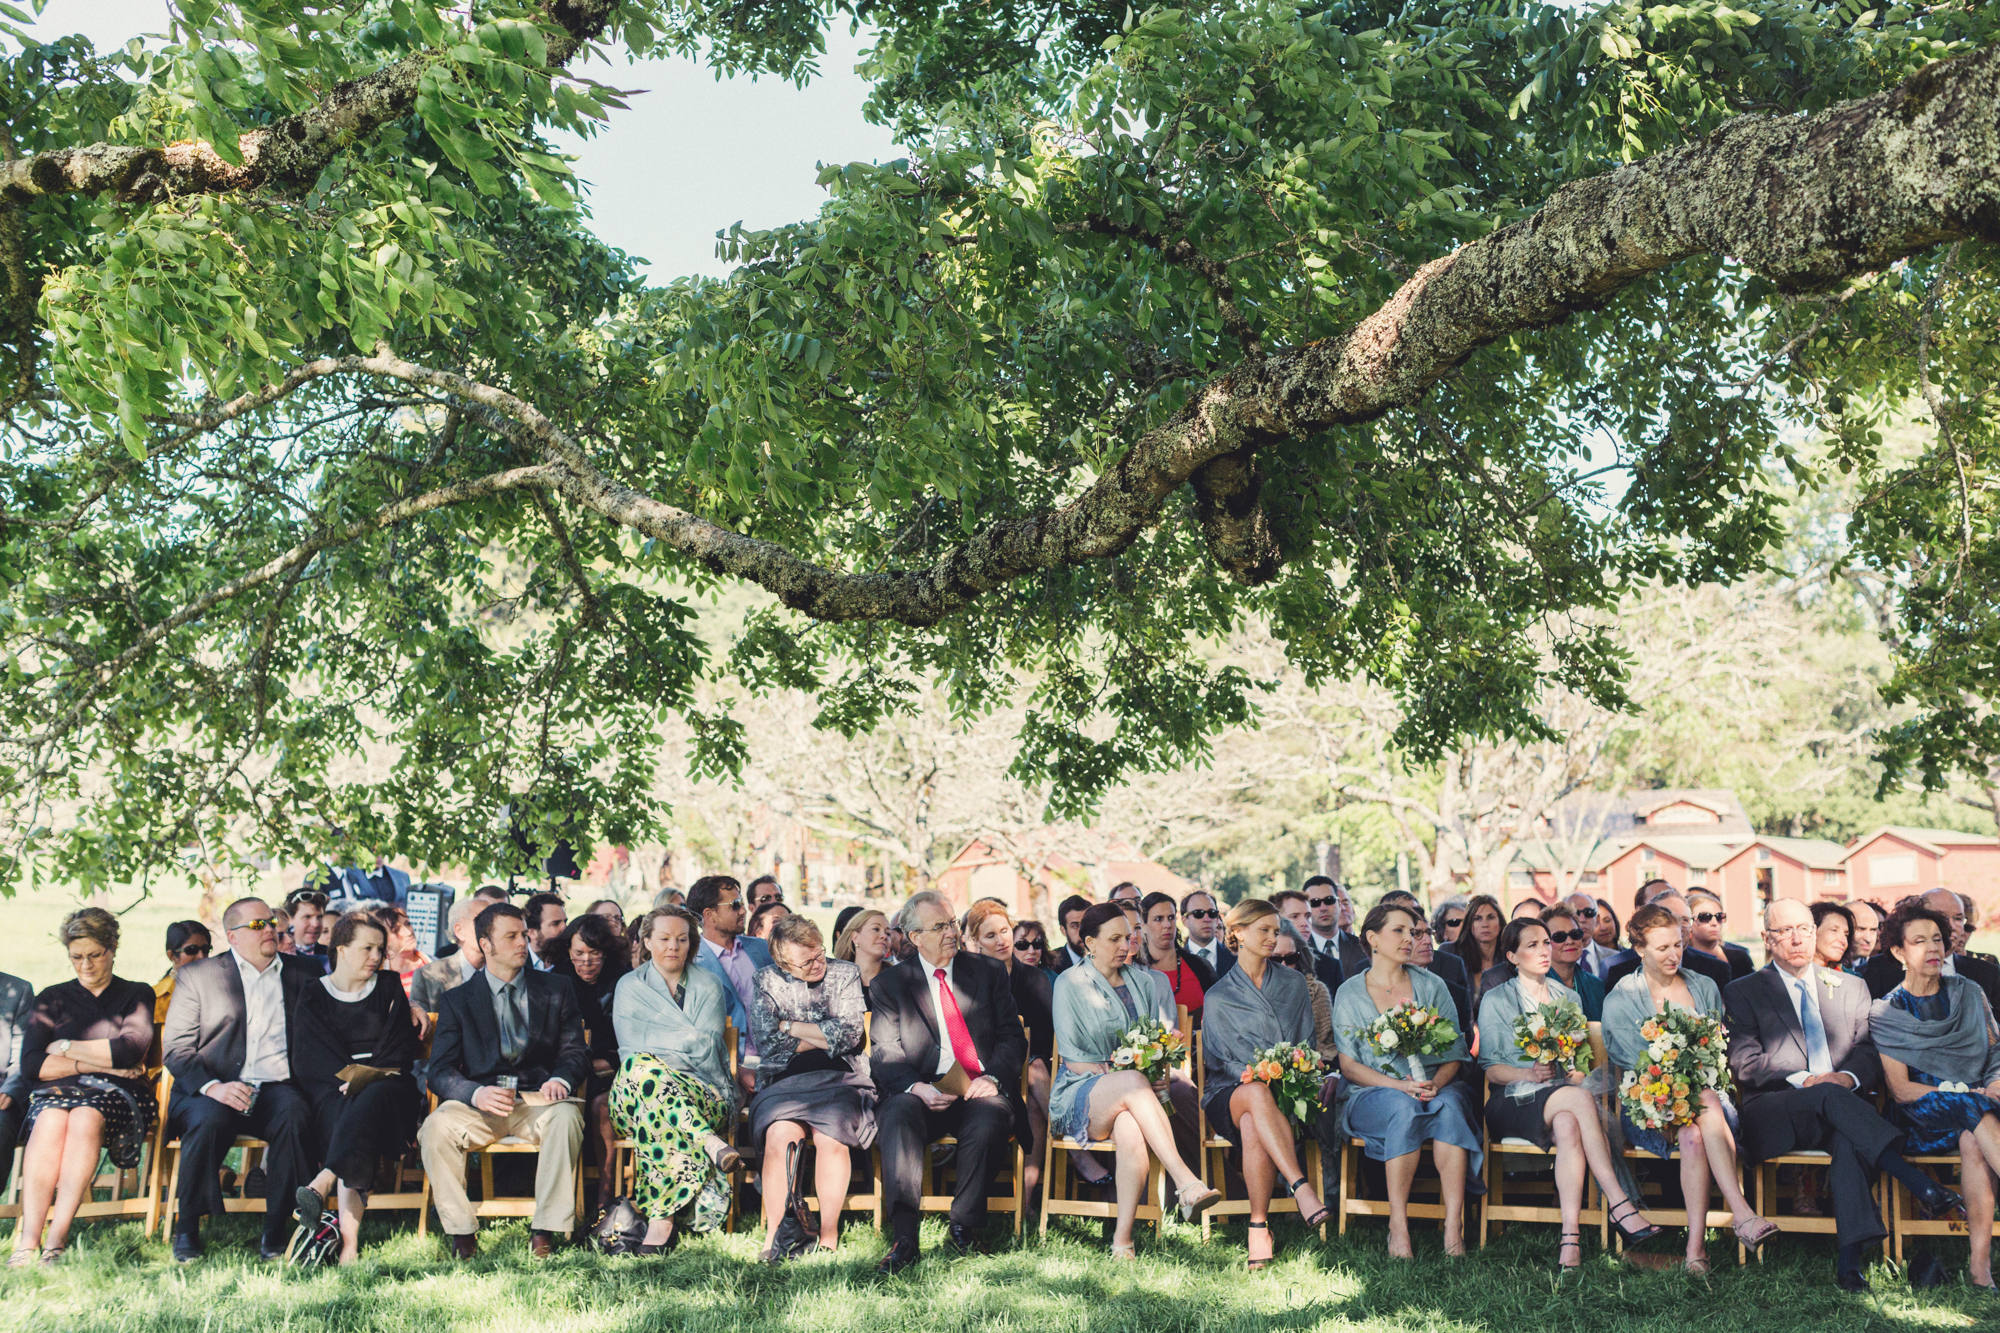 Triple S Ranch Wedding in Napa Valley @Anne-Claire Brun 0506